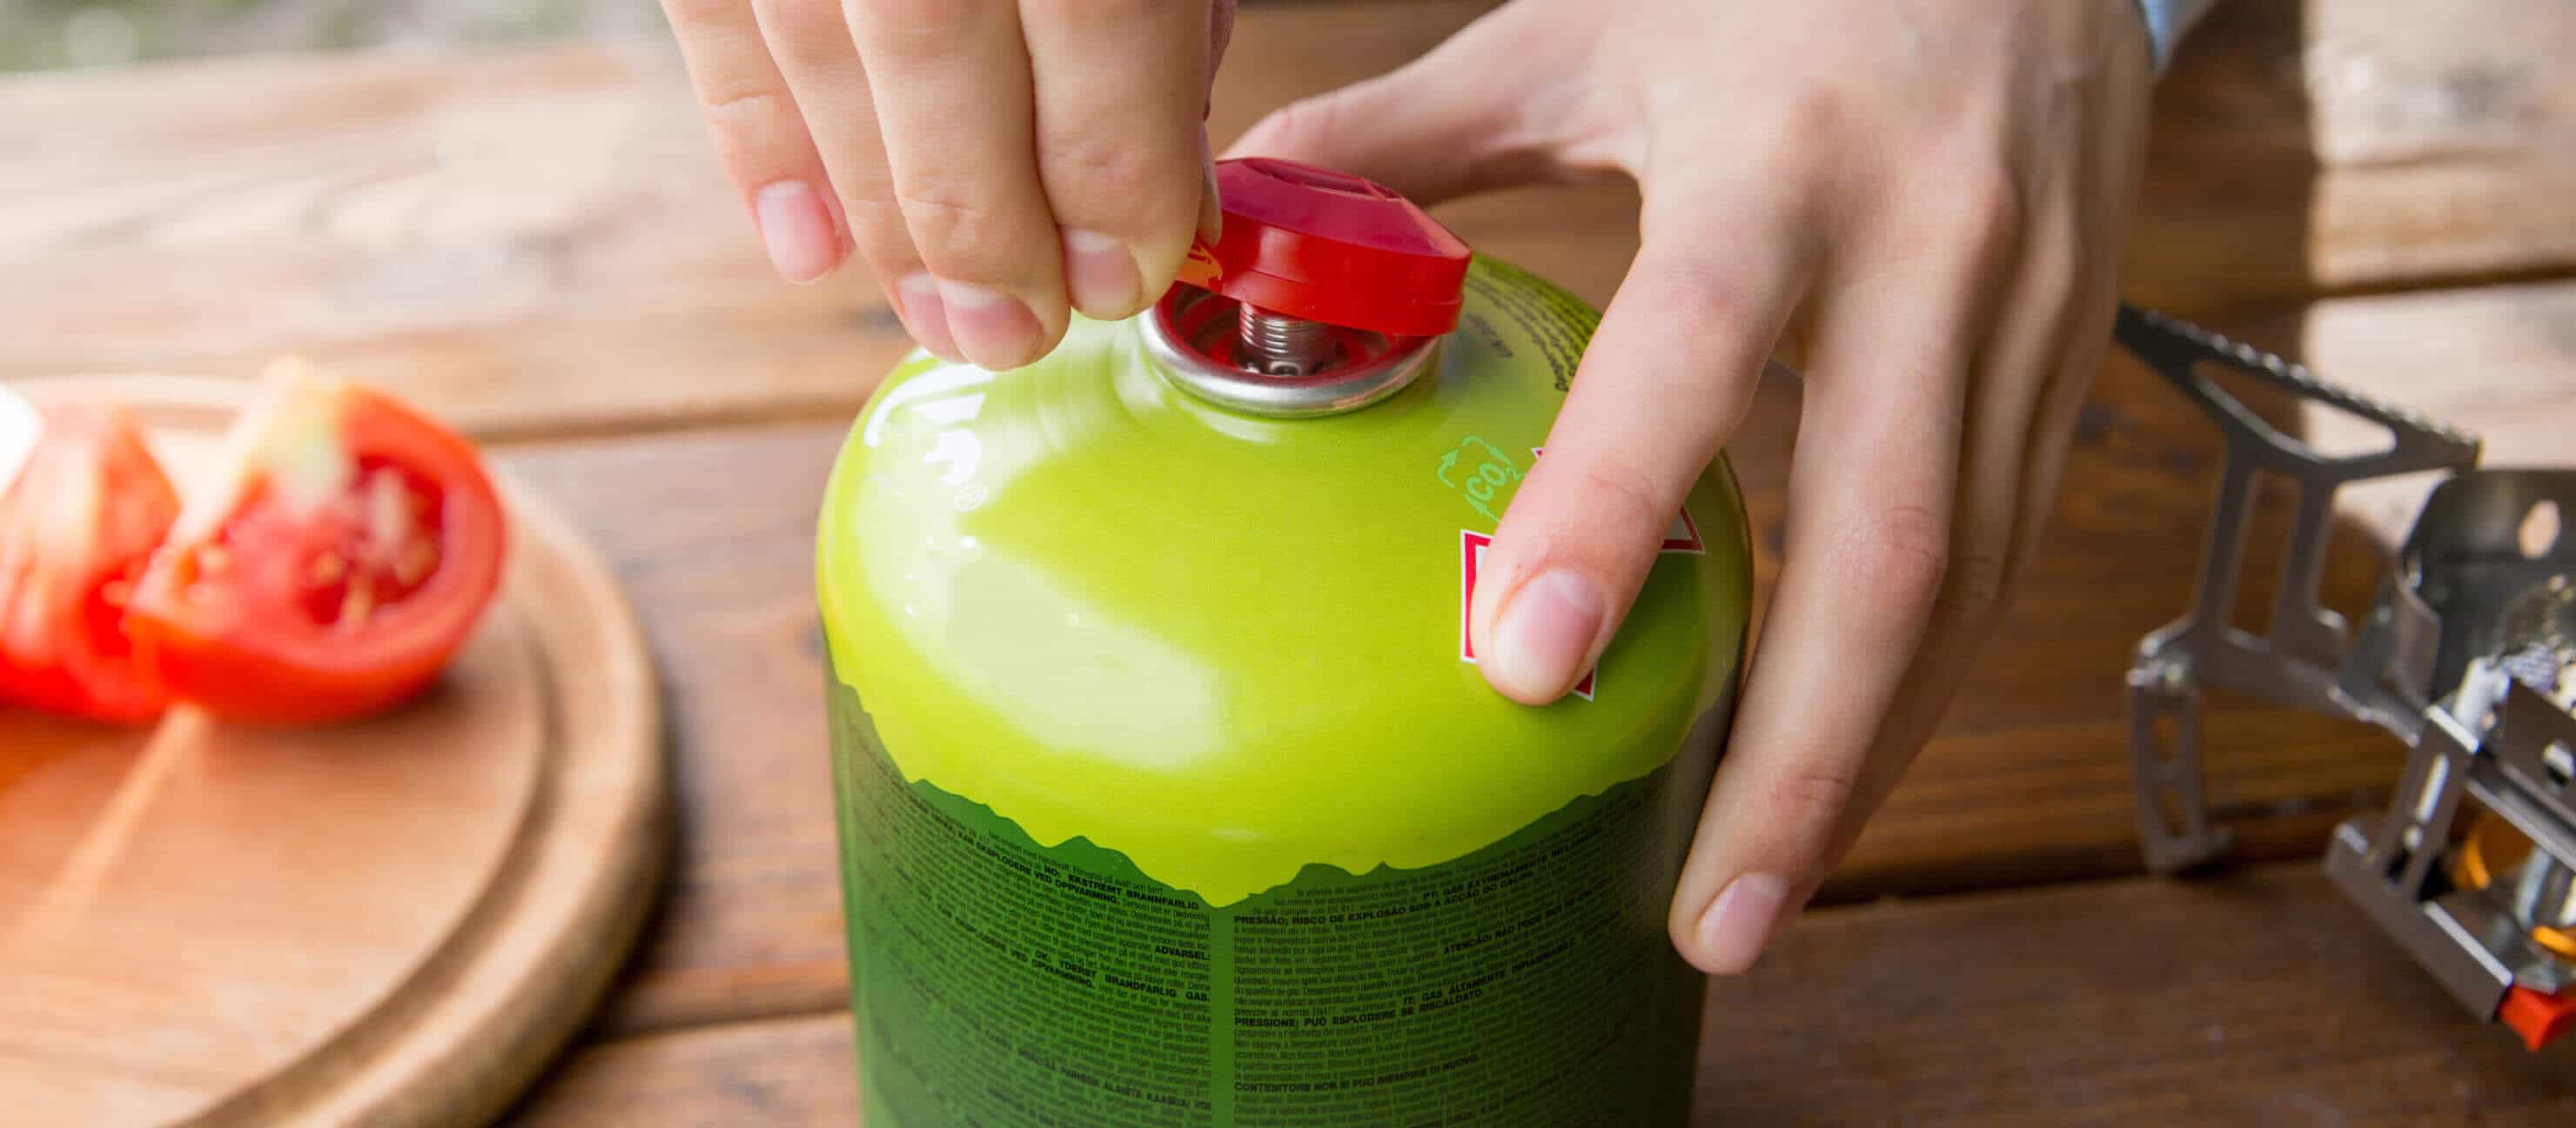 A person takes off the plastic cap of a propane canister
                        